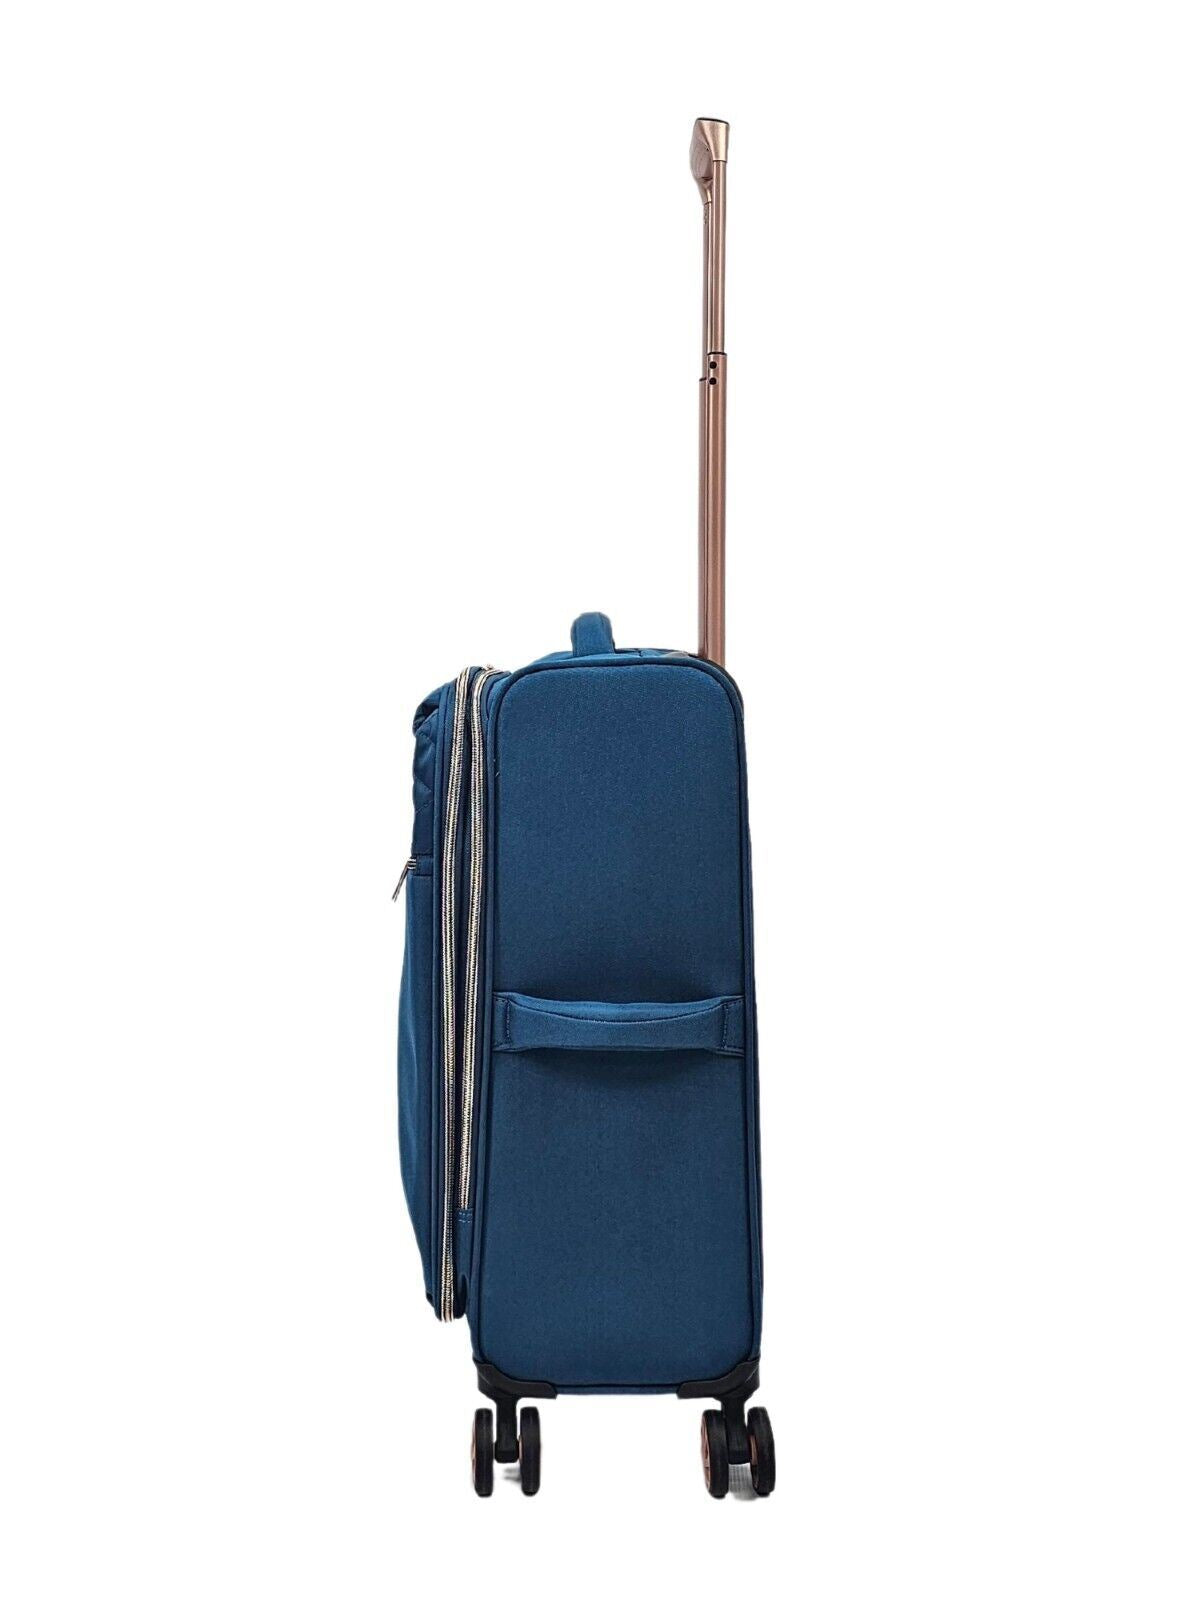 Cabin Teal blue Suitcases Set 4 Wheel Luggage Travel Lightweight Bags